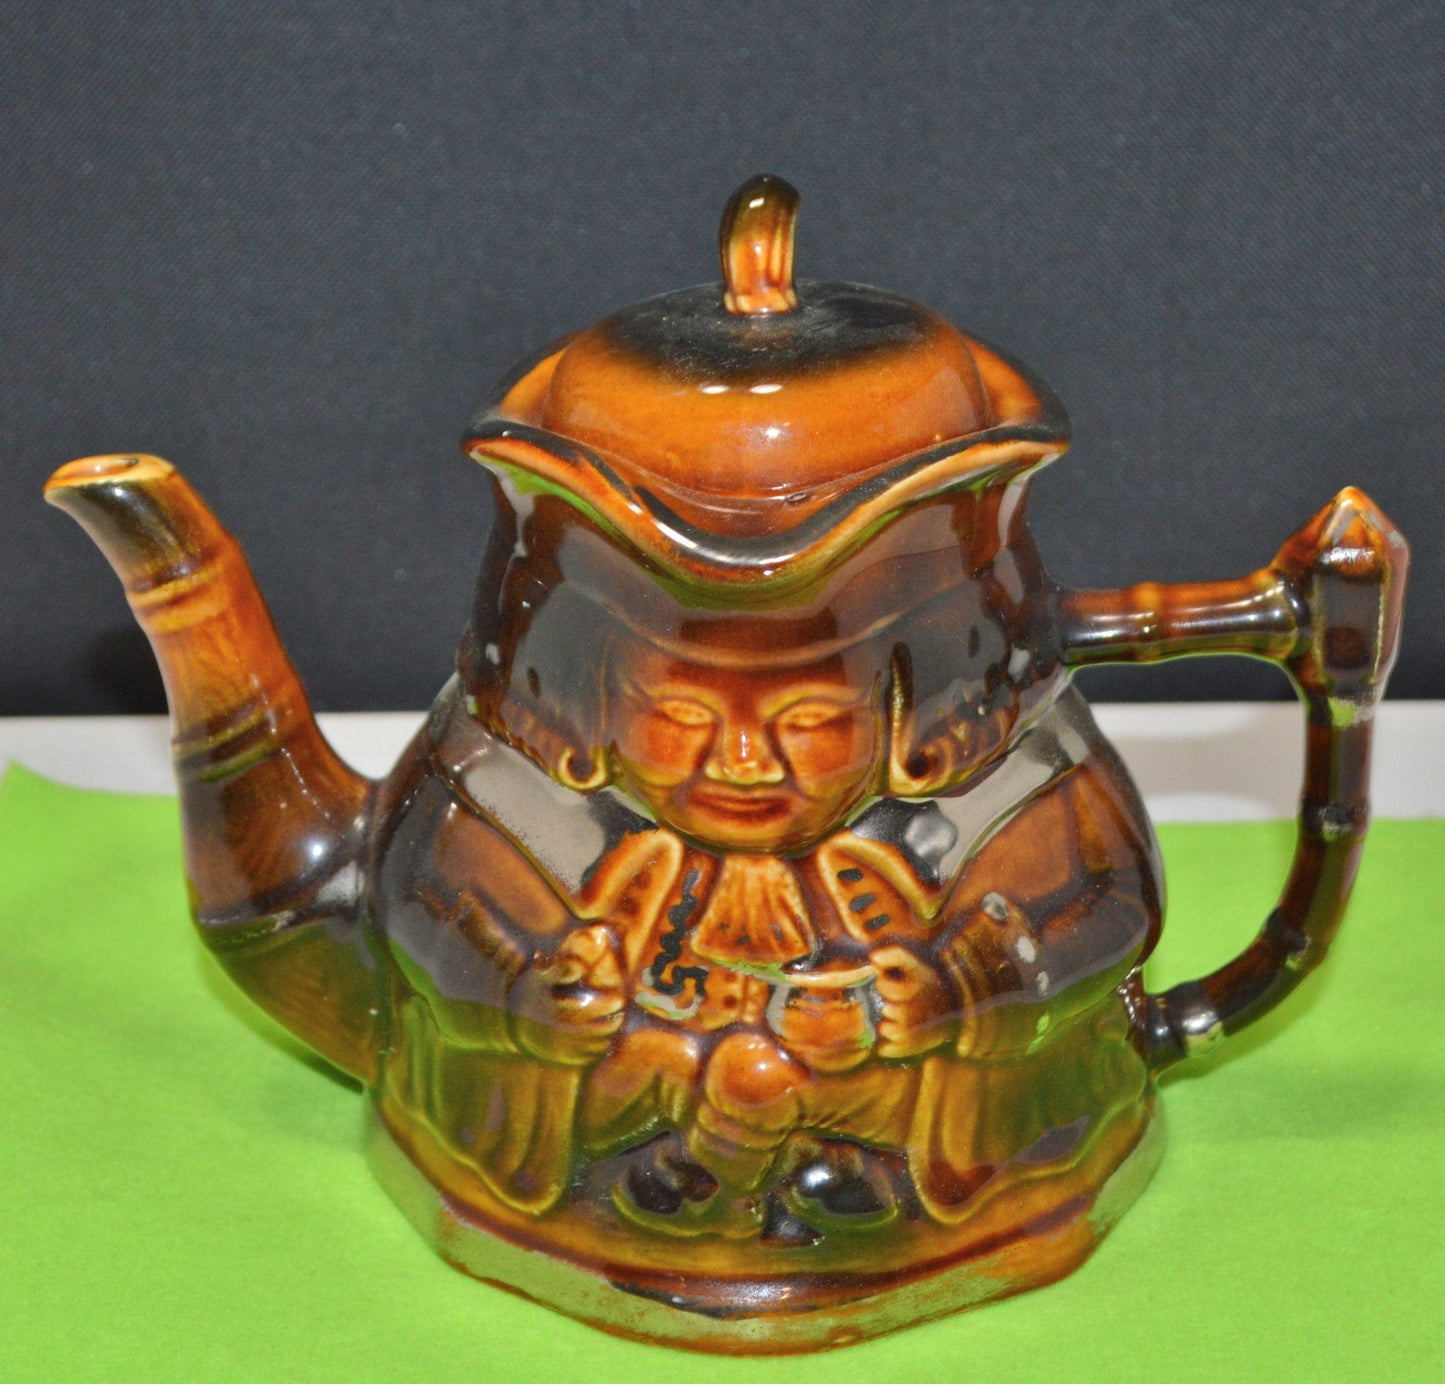 PRICE KENSINGTON DOUBLE FACED CHARACTER TEAPOT(PREVIOUSLY OWNED) GOOD CONDITION - TMD167207